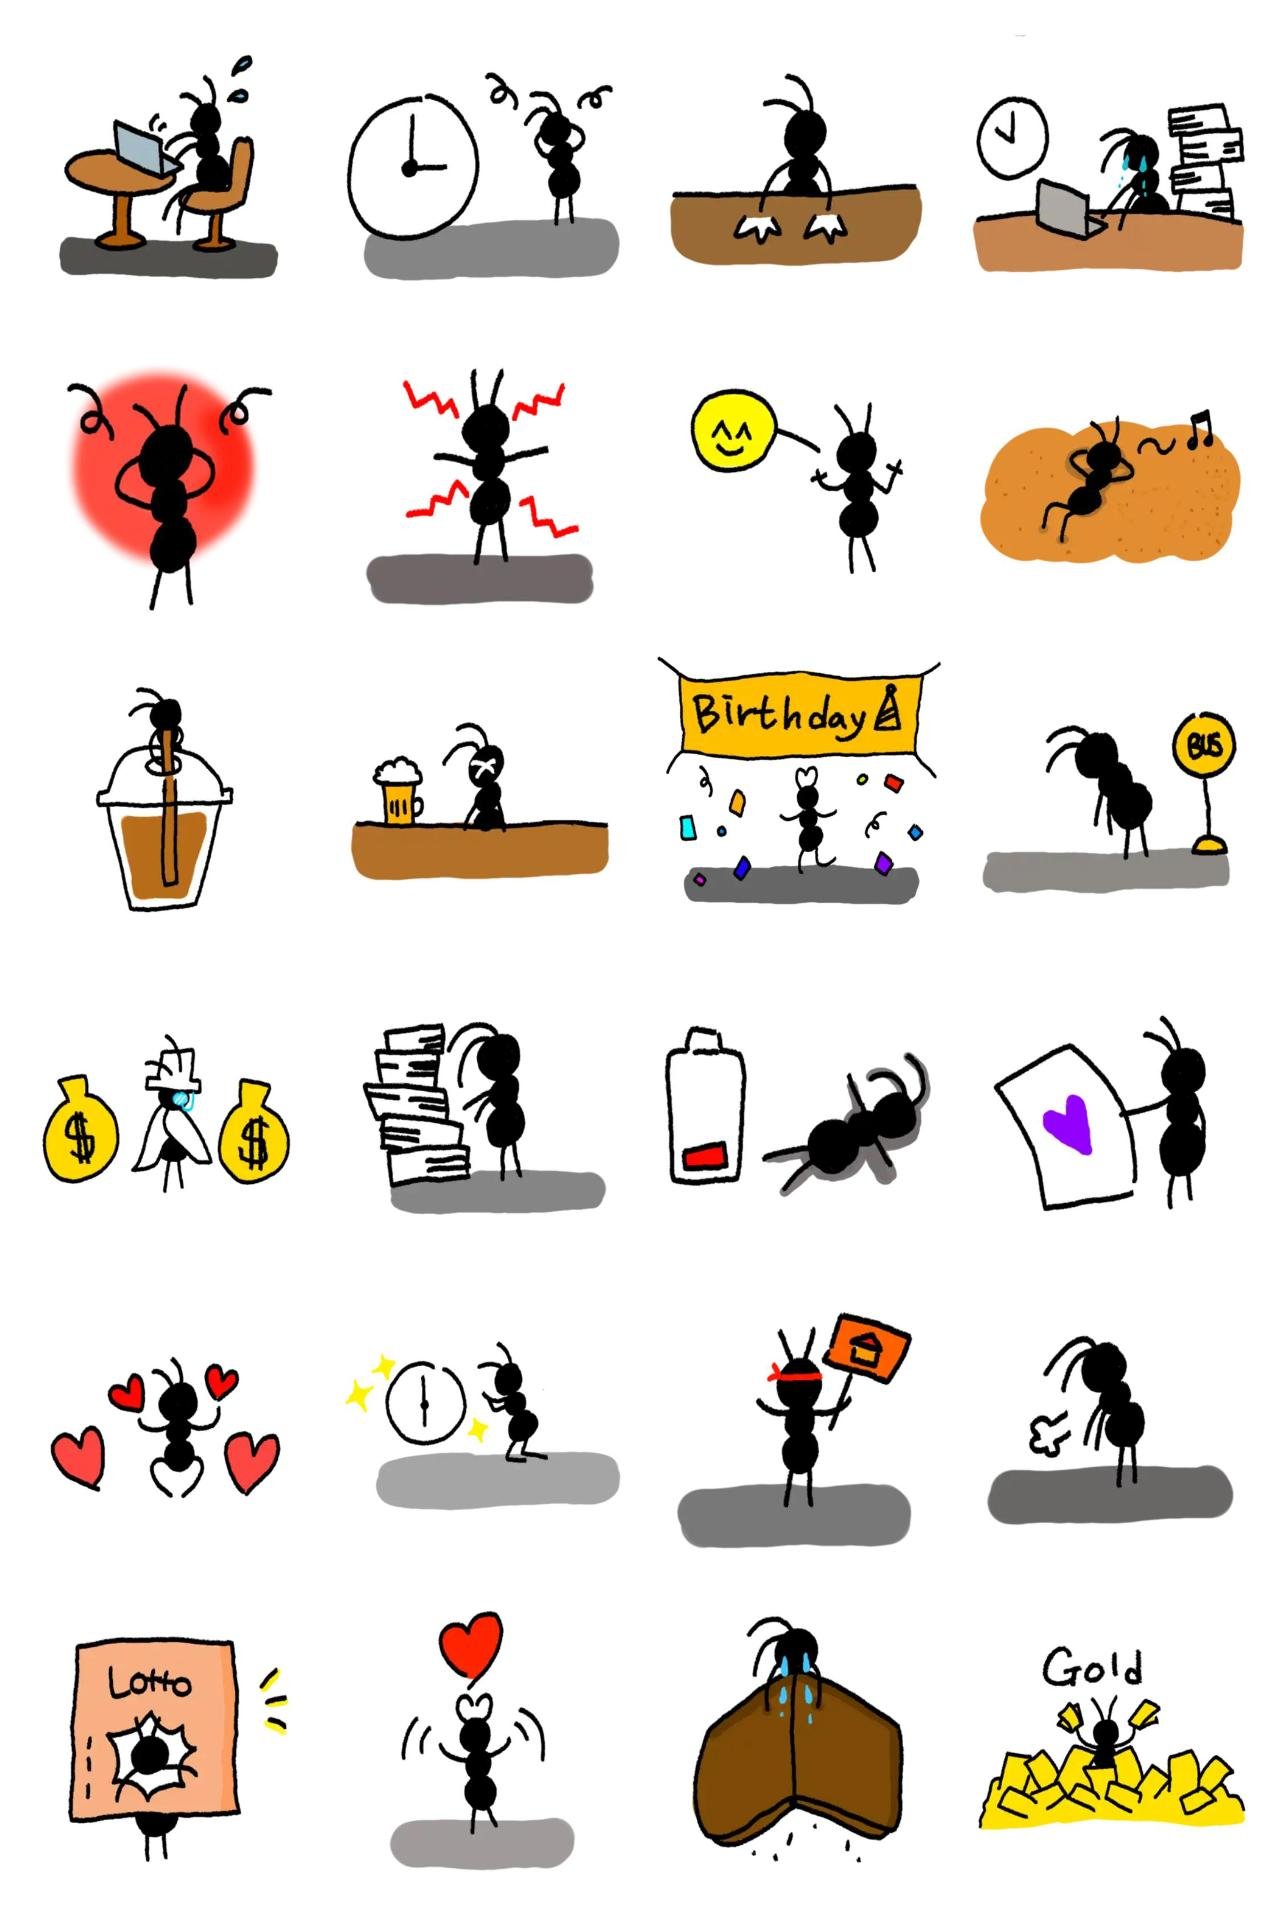 worker ant Etc. sticker pack for Whatsapp, Telegram, Signal, and others chatting and message apps